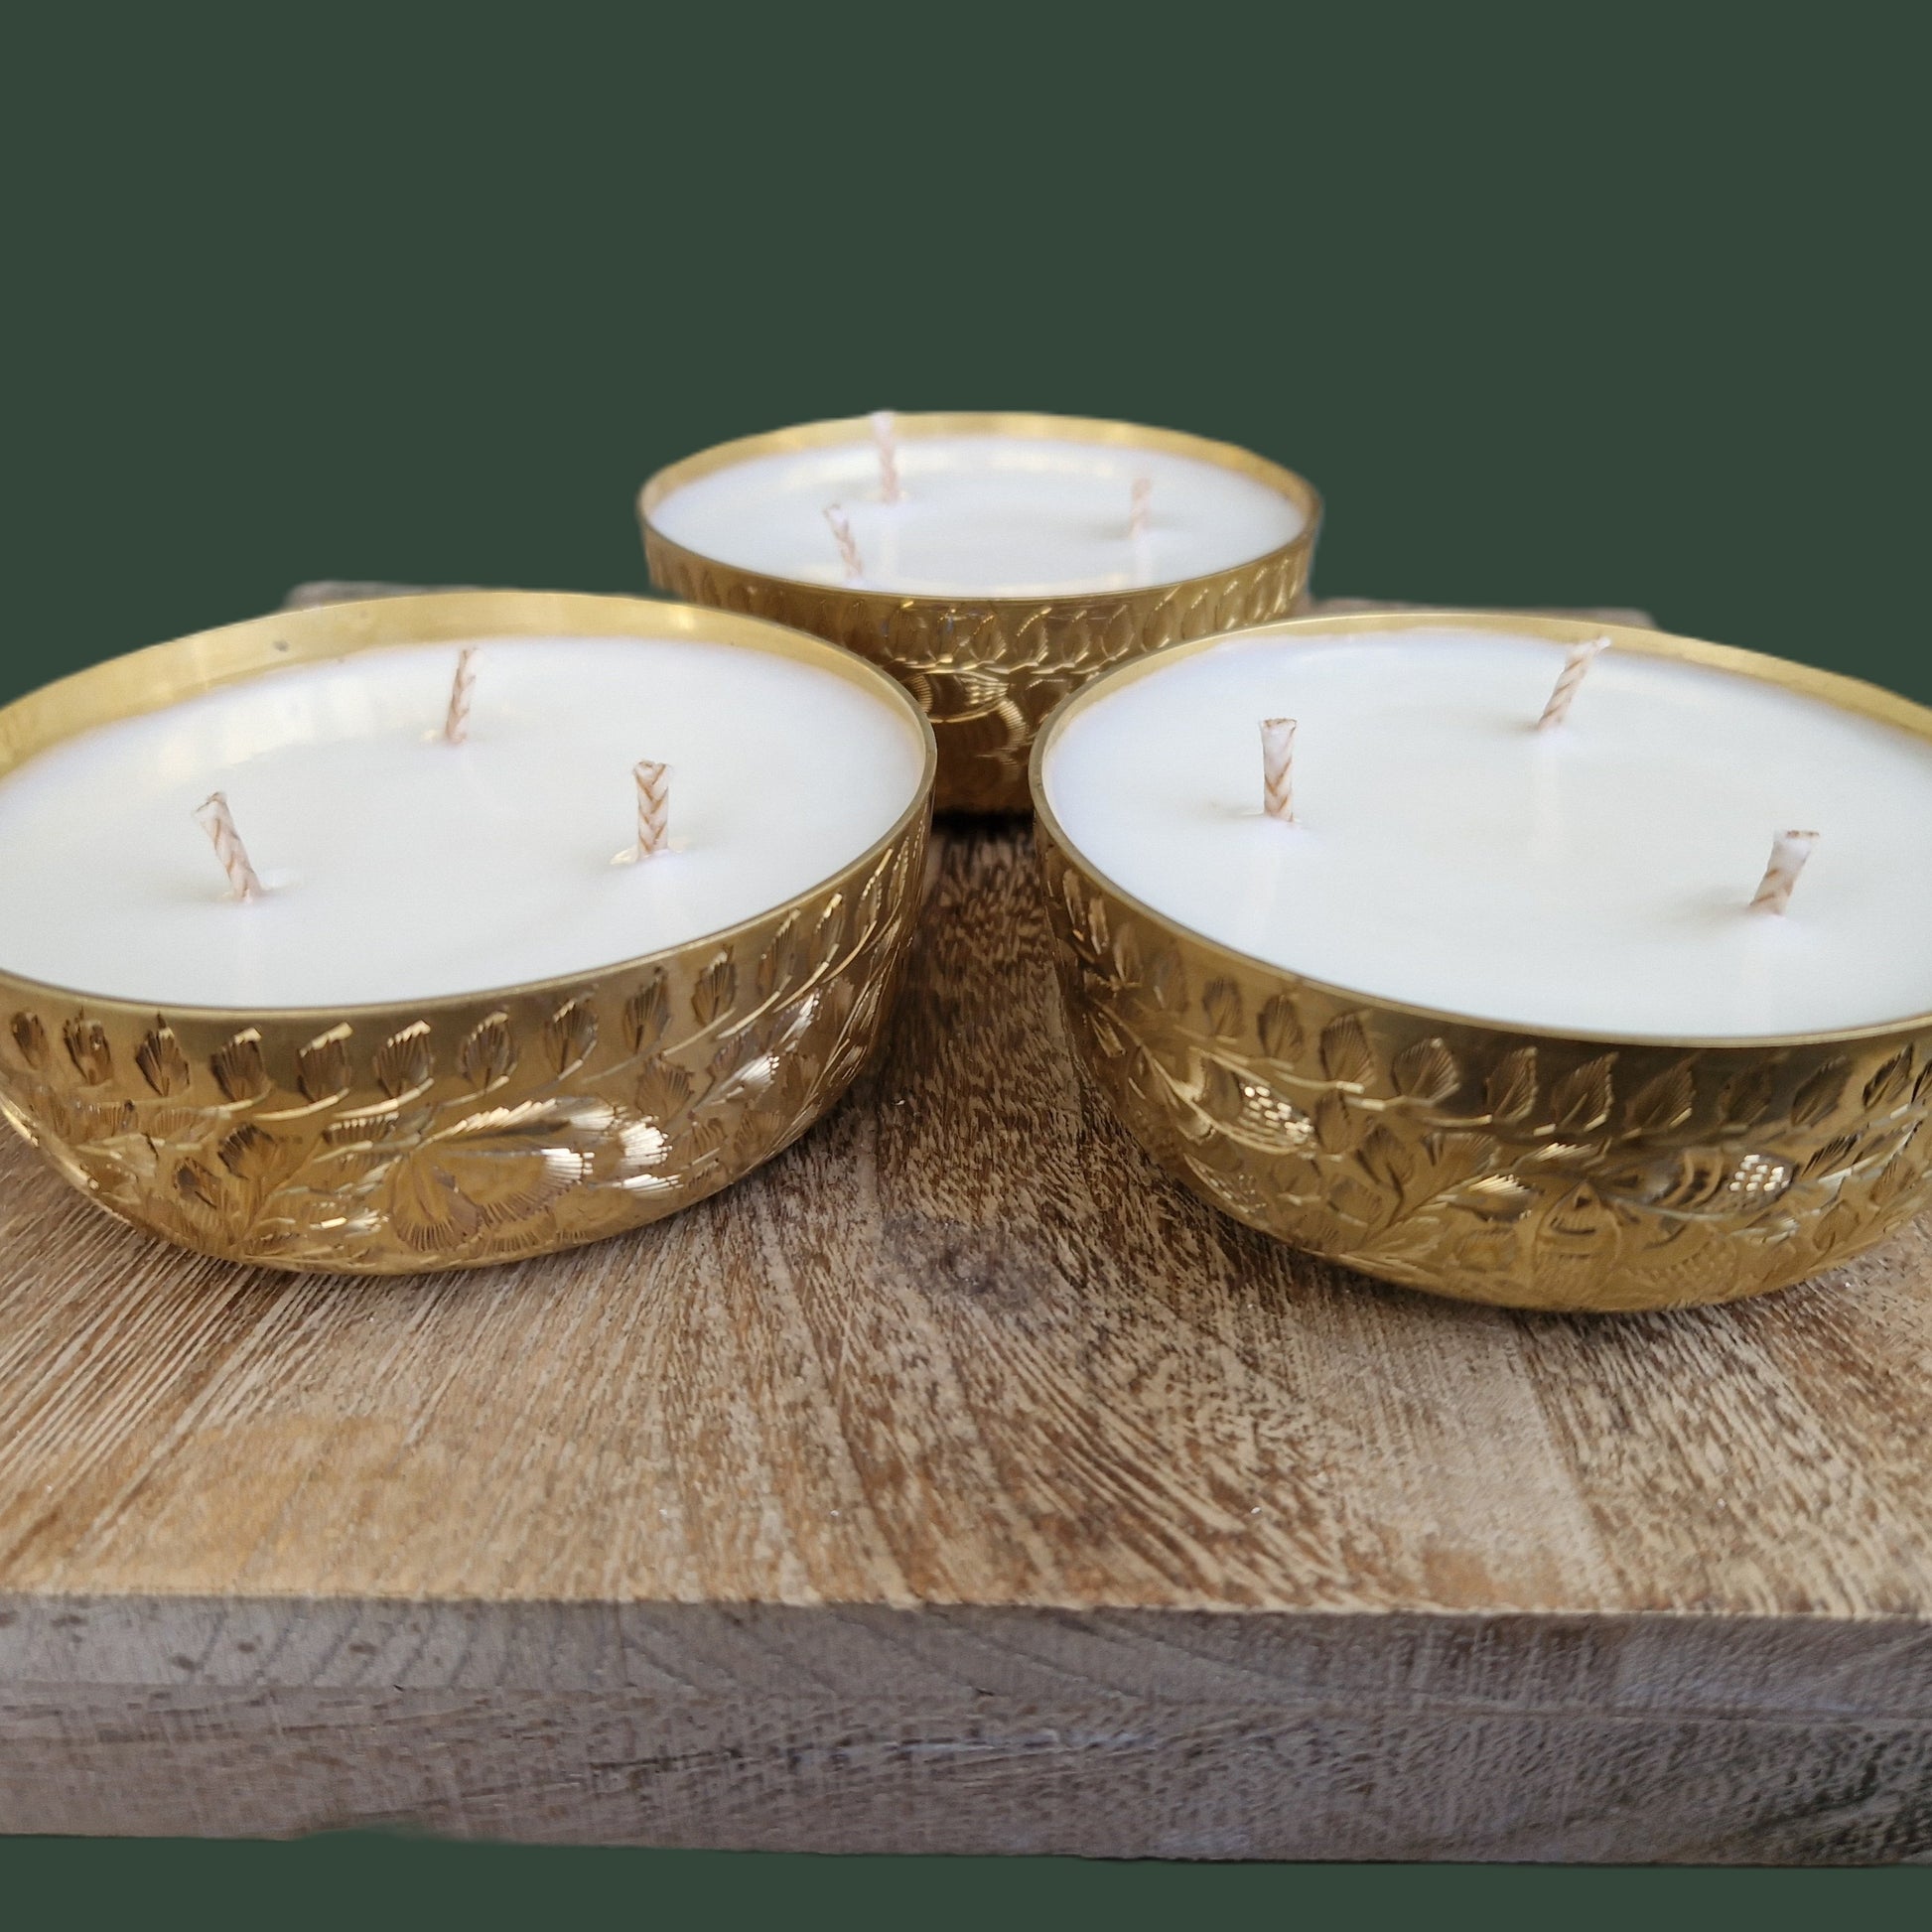 Golden Indian bowl candle with 3 wicks